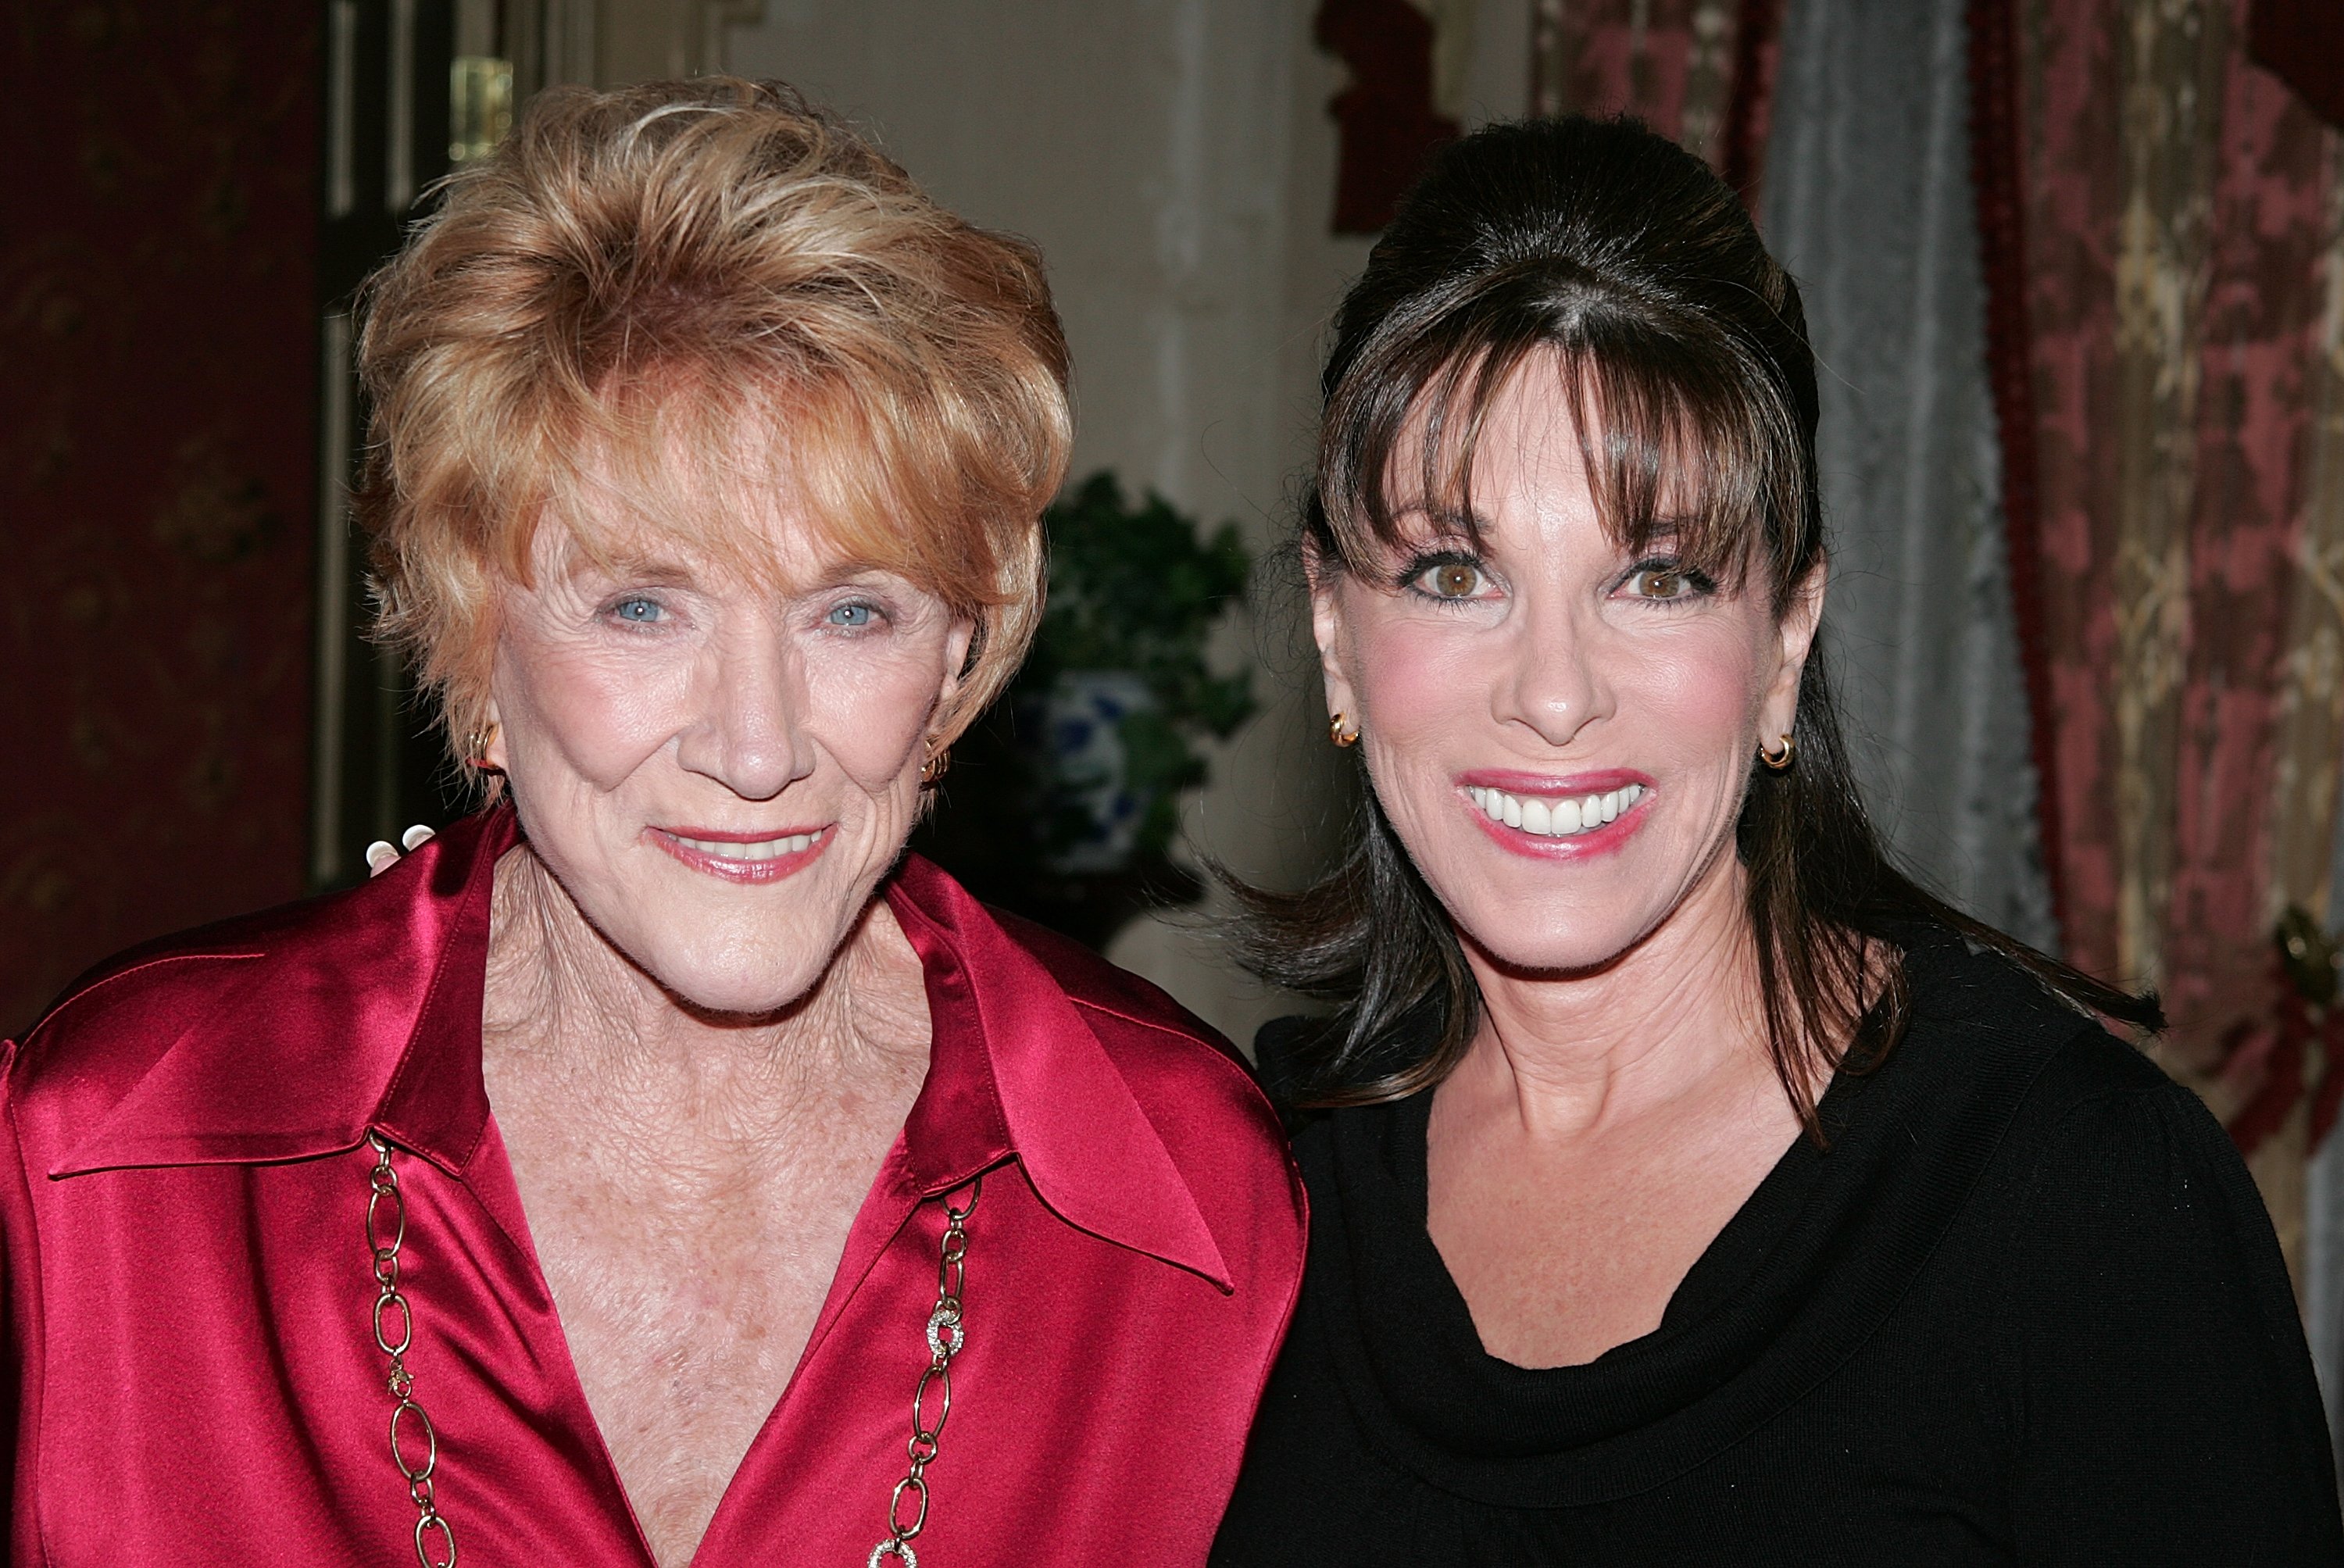 Actress Jeanne Cooper and Kate Linder during Cooper's 80th birthday celebration on "The Young and the Restless" stage at CBS Television City on October 24, 2008 in Los Angeles, California. / Source: Getty Images